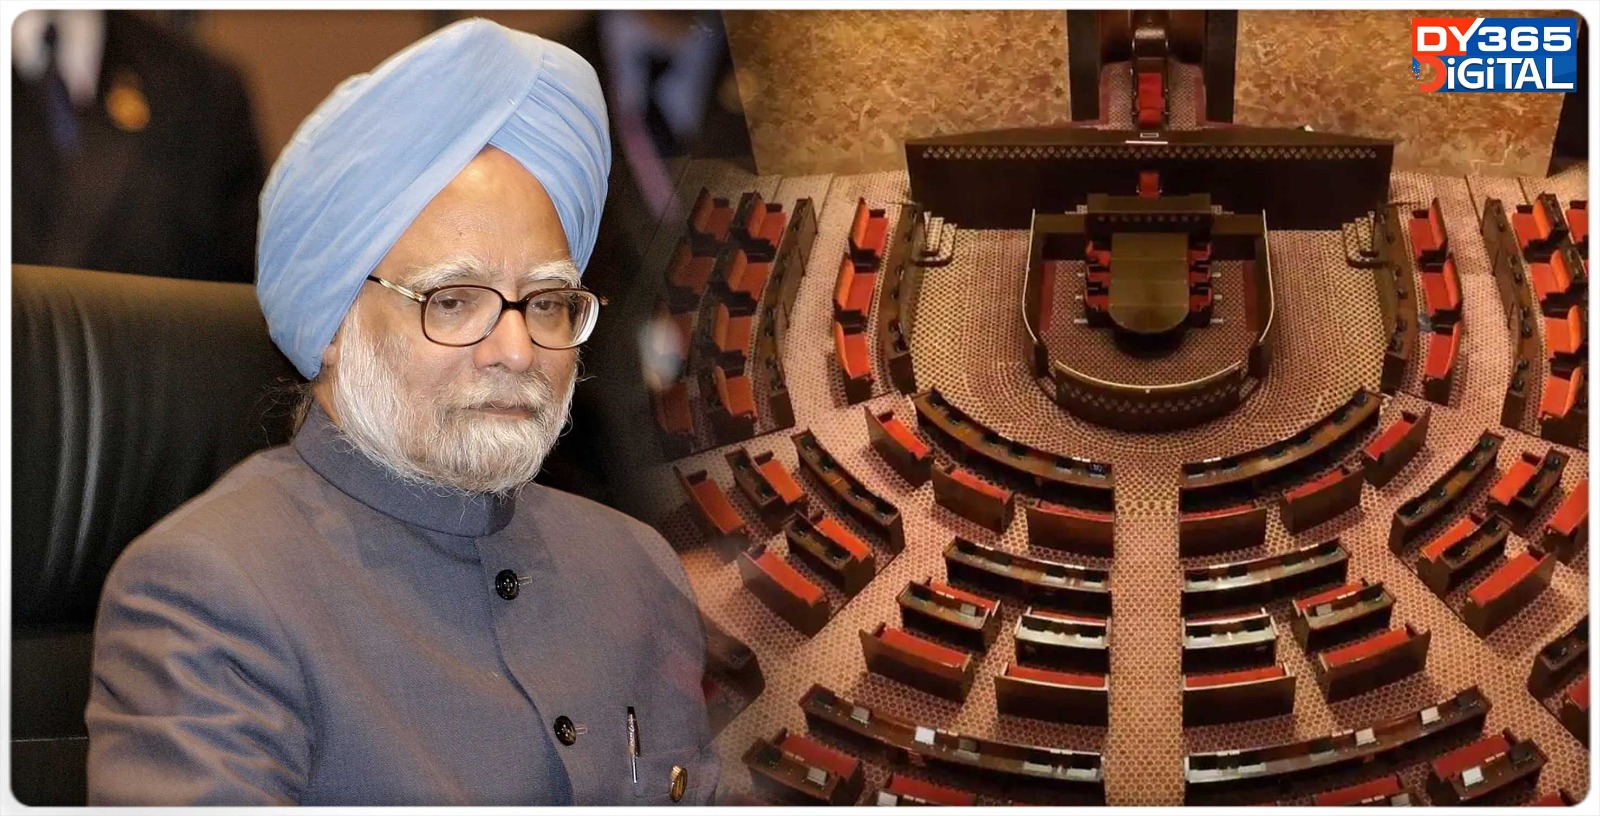 former-pm-manmohan-singh-retires-from-rajya-sabha-today-after-33-years